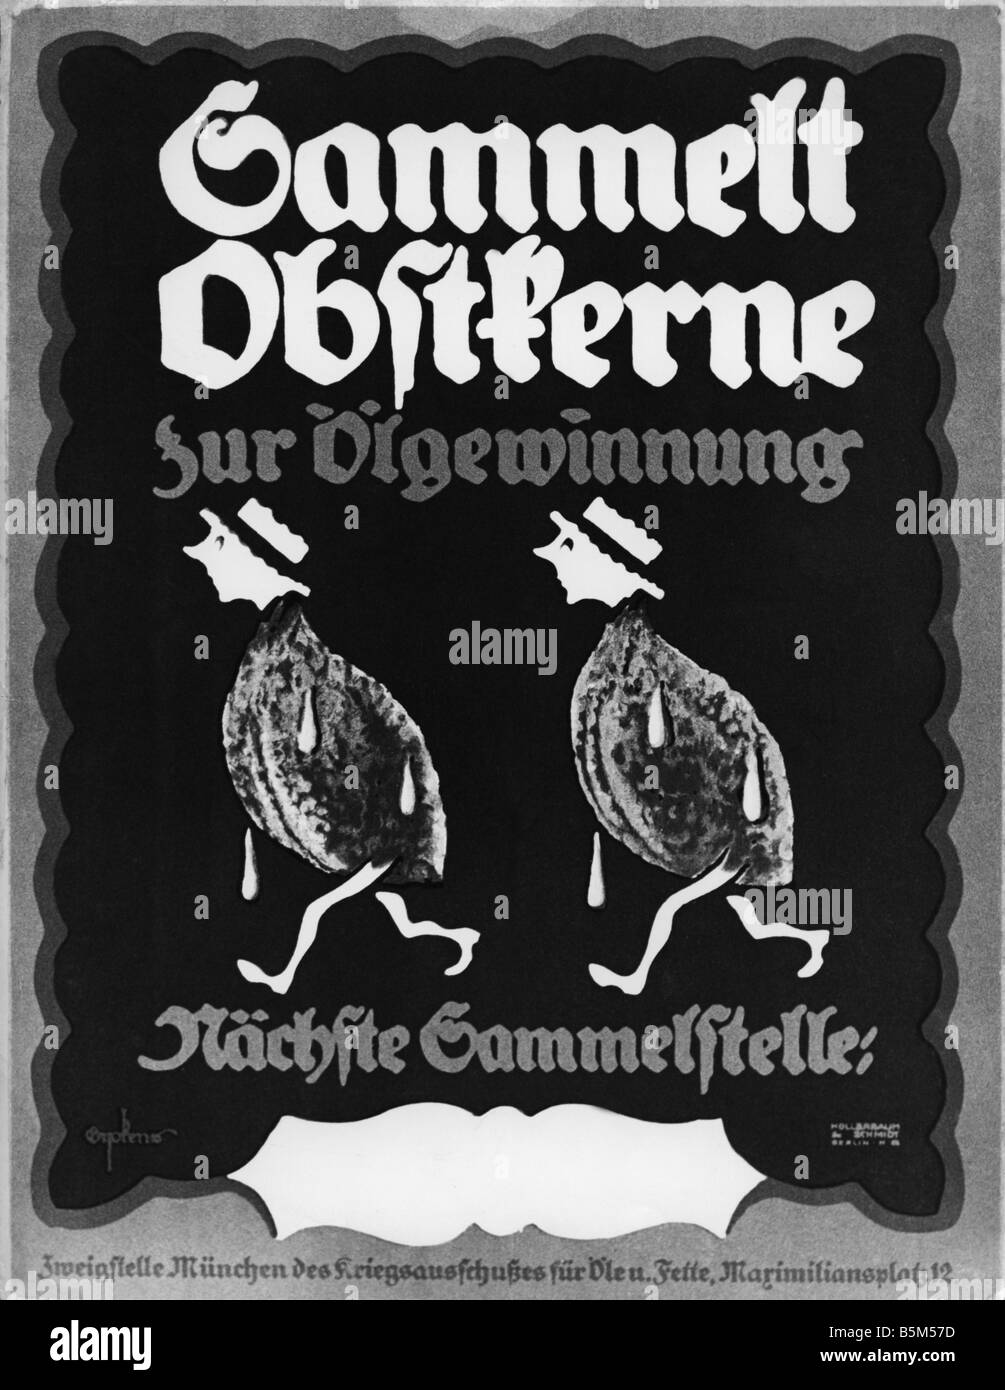 events, First World War / WWI, propaganda, poster 'Sammelt Obstkerne zur Oelgewinnung' (Collect fruit stones for oil extraction), Munich, Germany, 20th century, Stock Photo